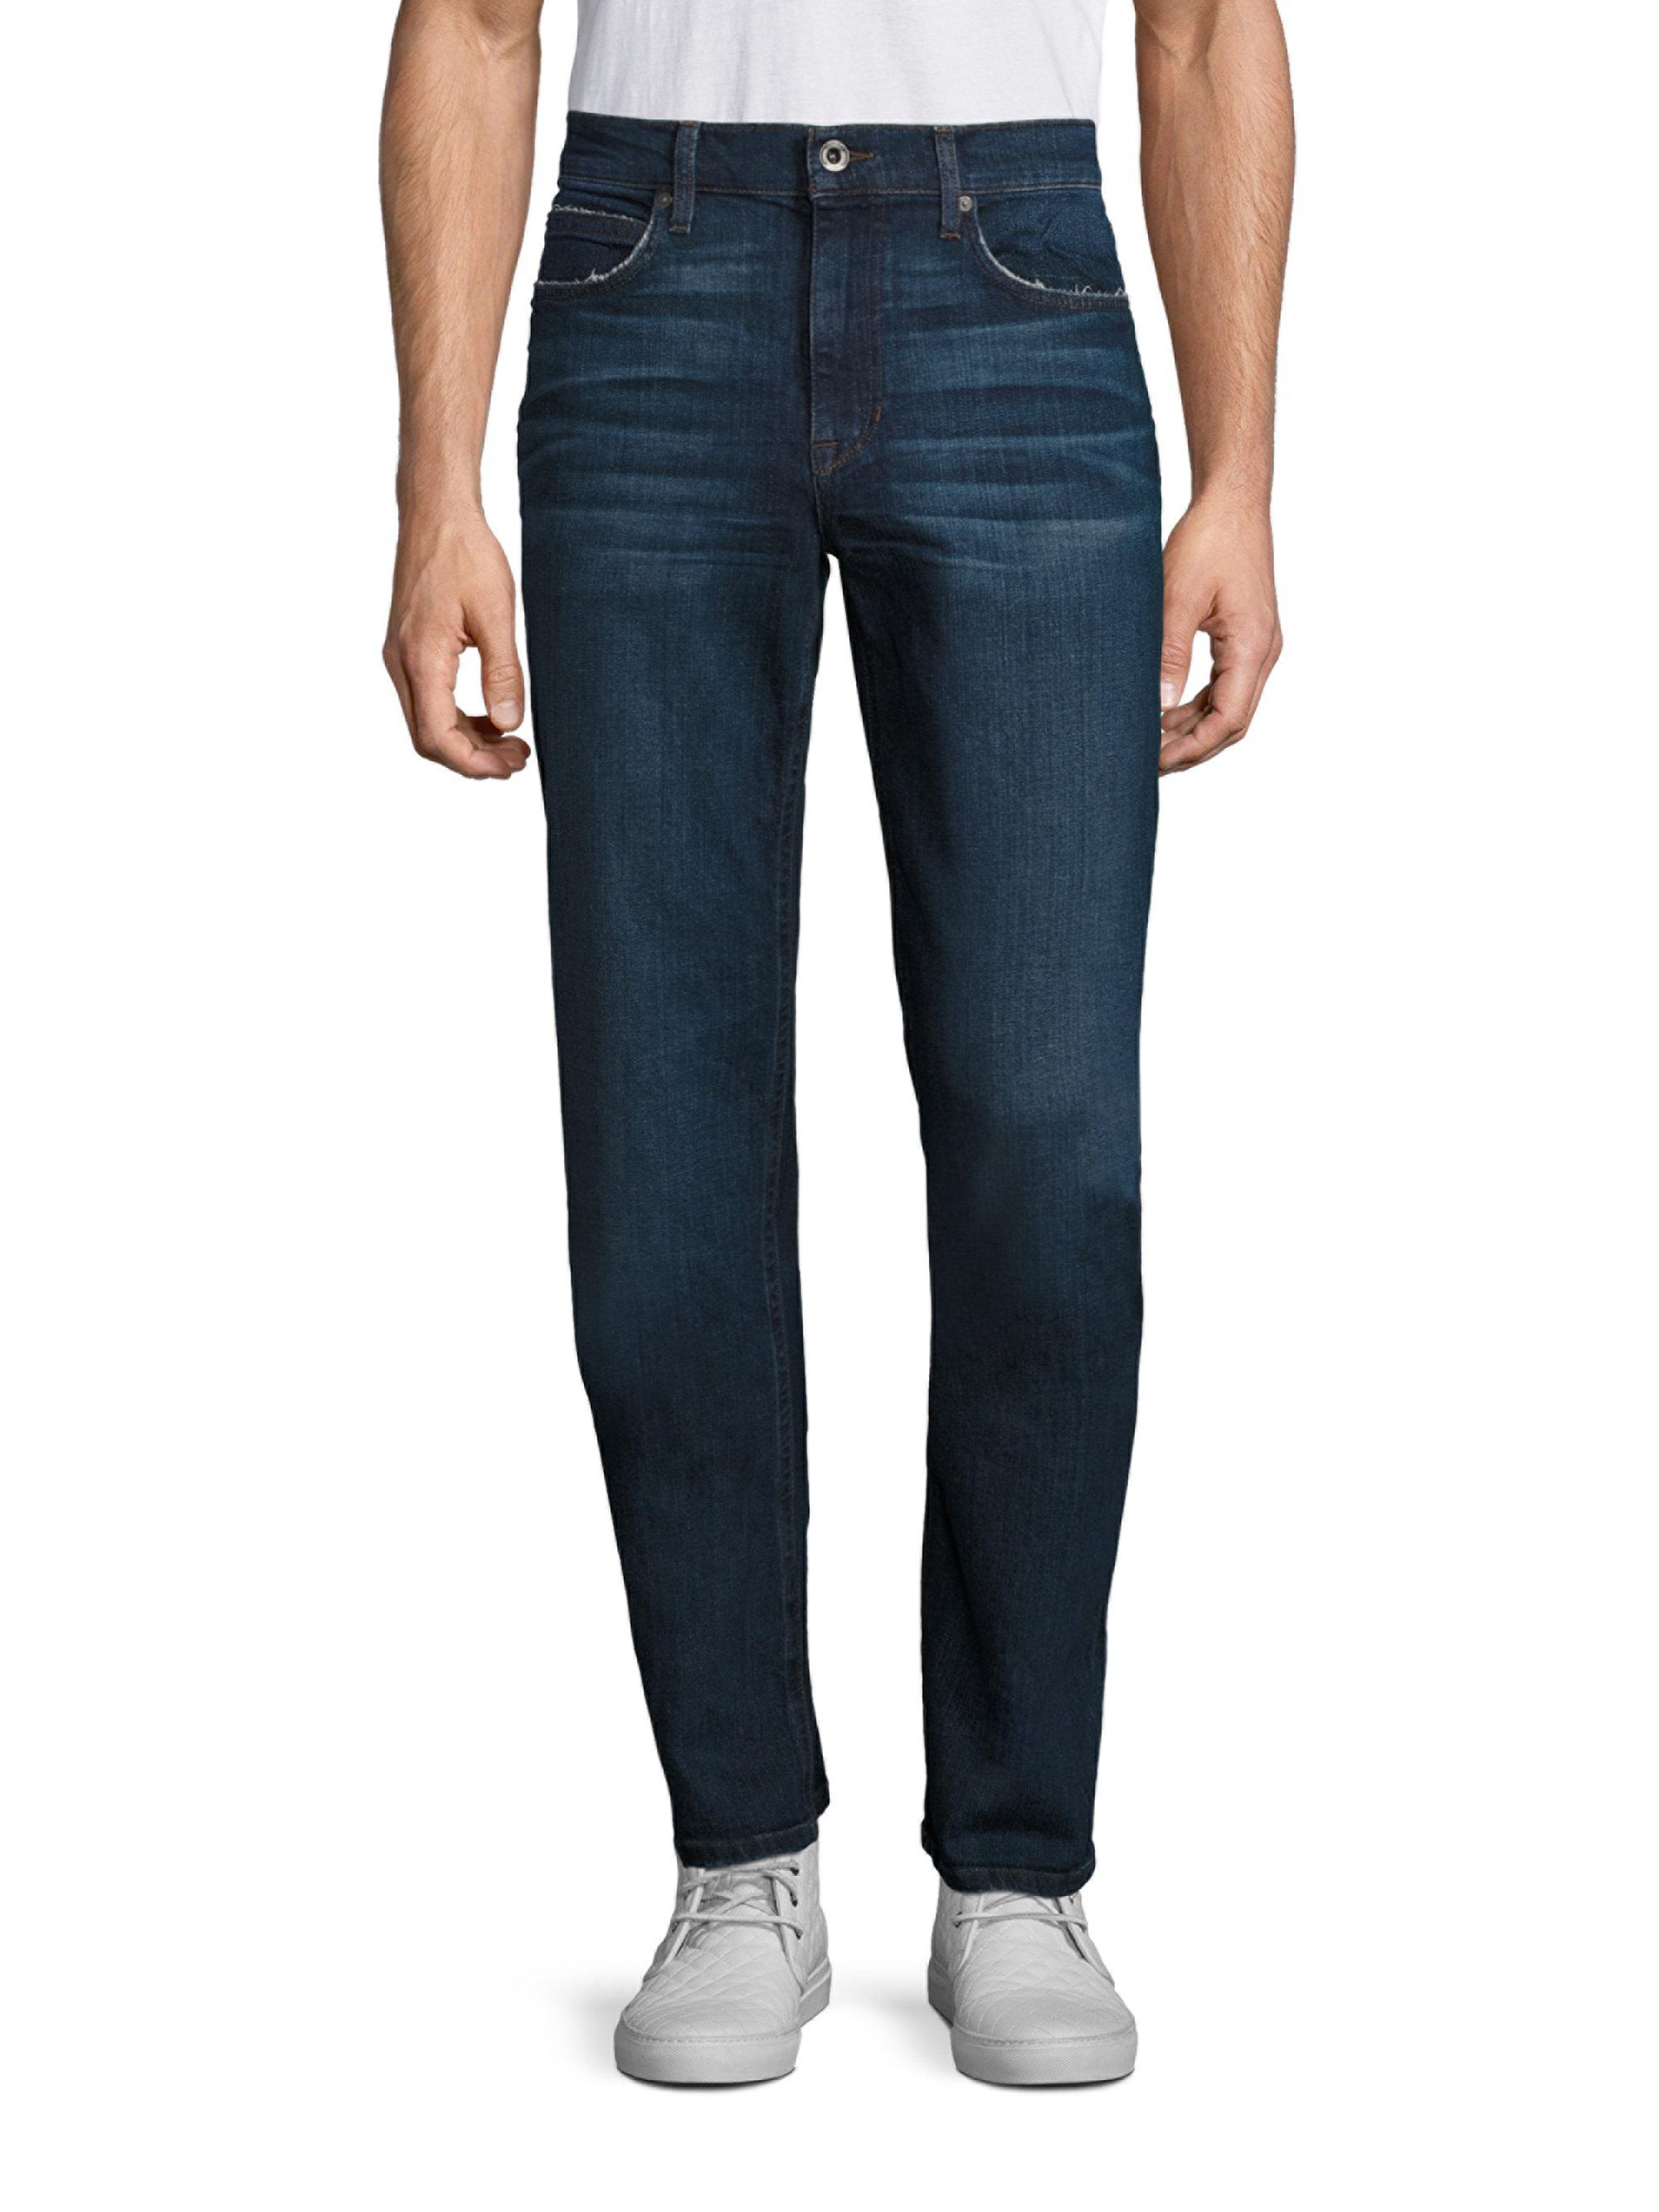 Lyst - Joe'S The Rebel Straight-fit Jeans in Blue for Men